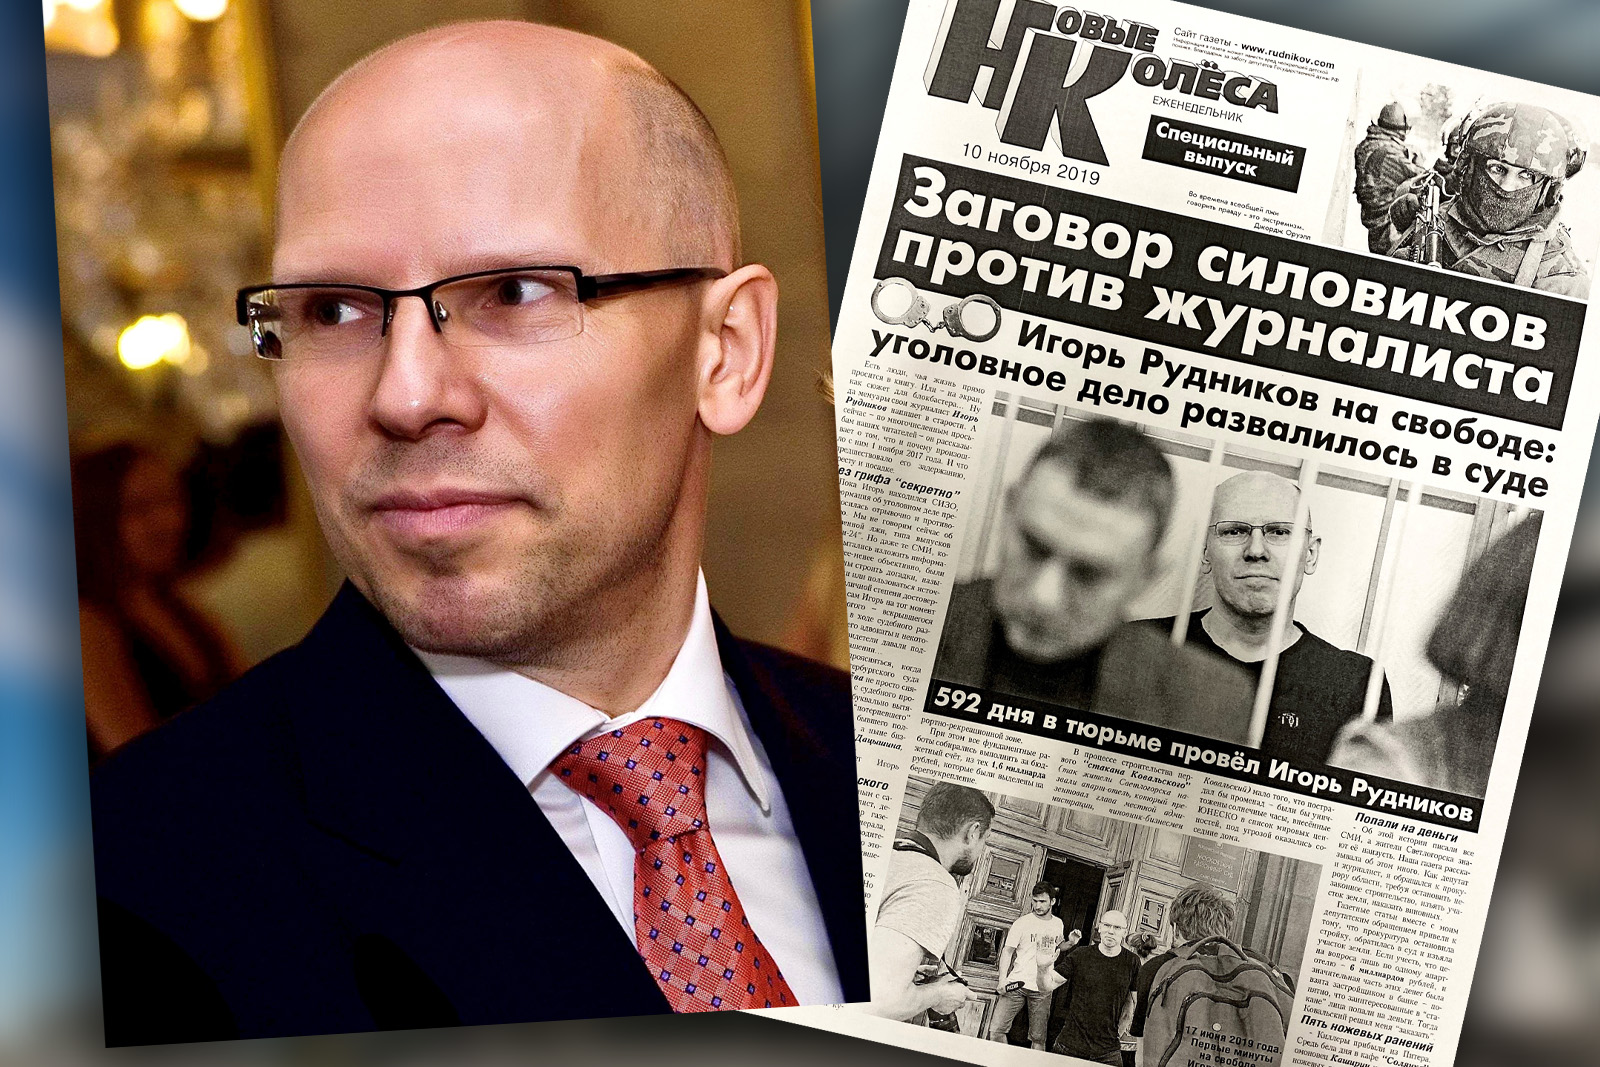 Russian journalist Igor Rudinov alongside an image of the newspaper announcing his arrest.